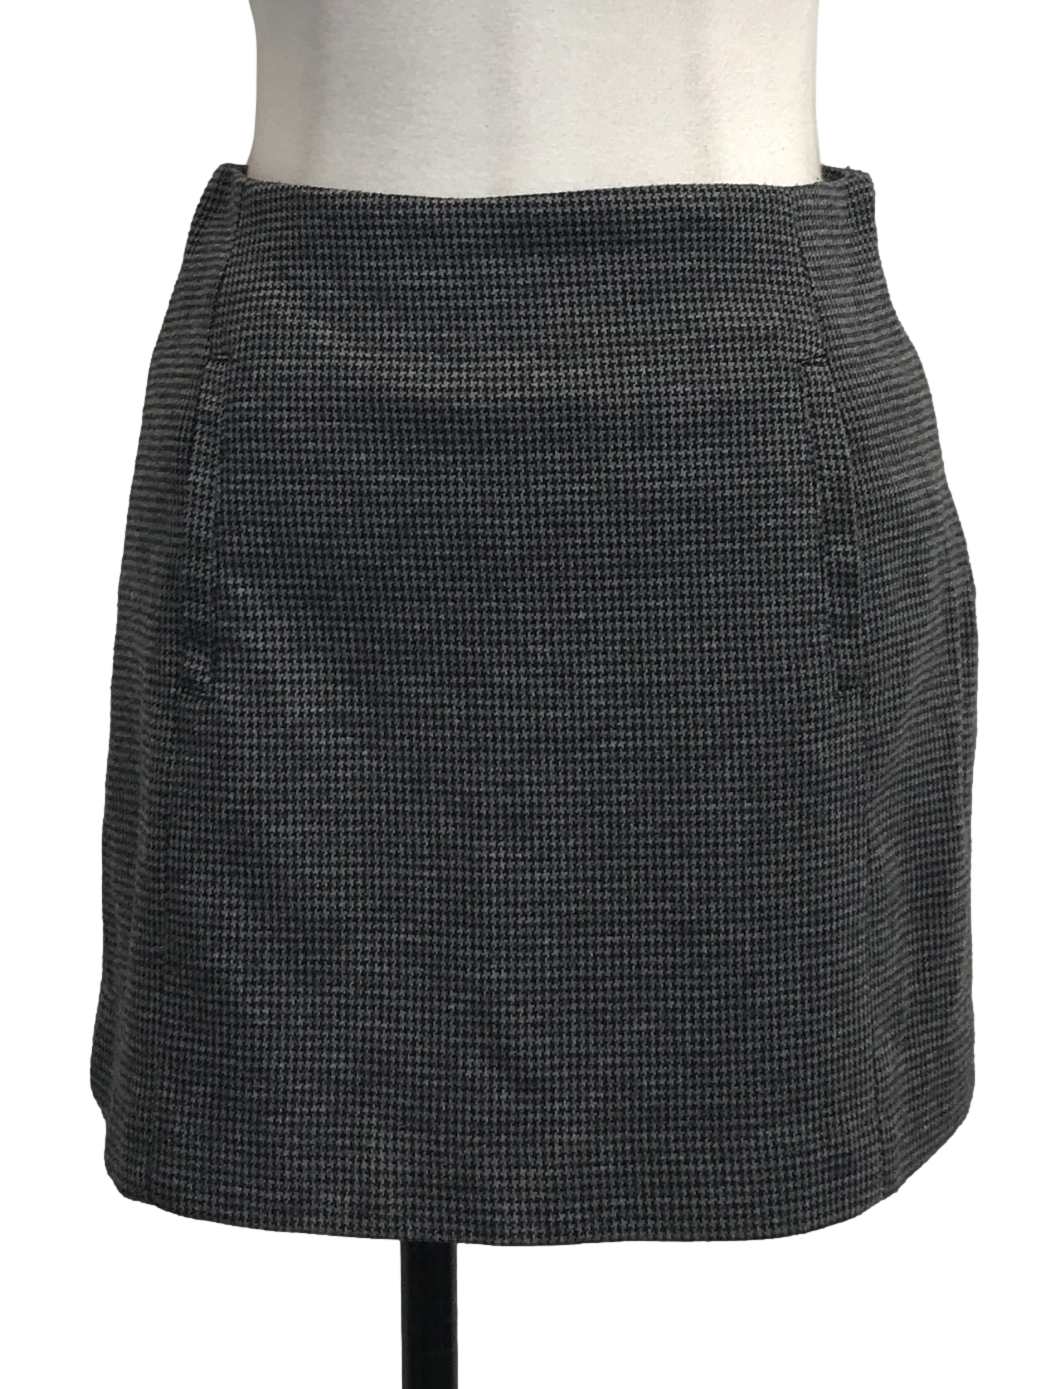 Charcoal Houndstooth A-Line Skirt